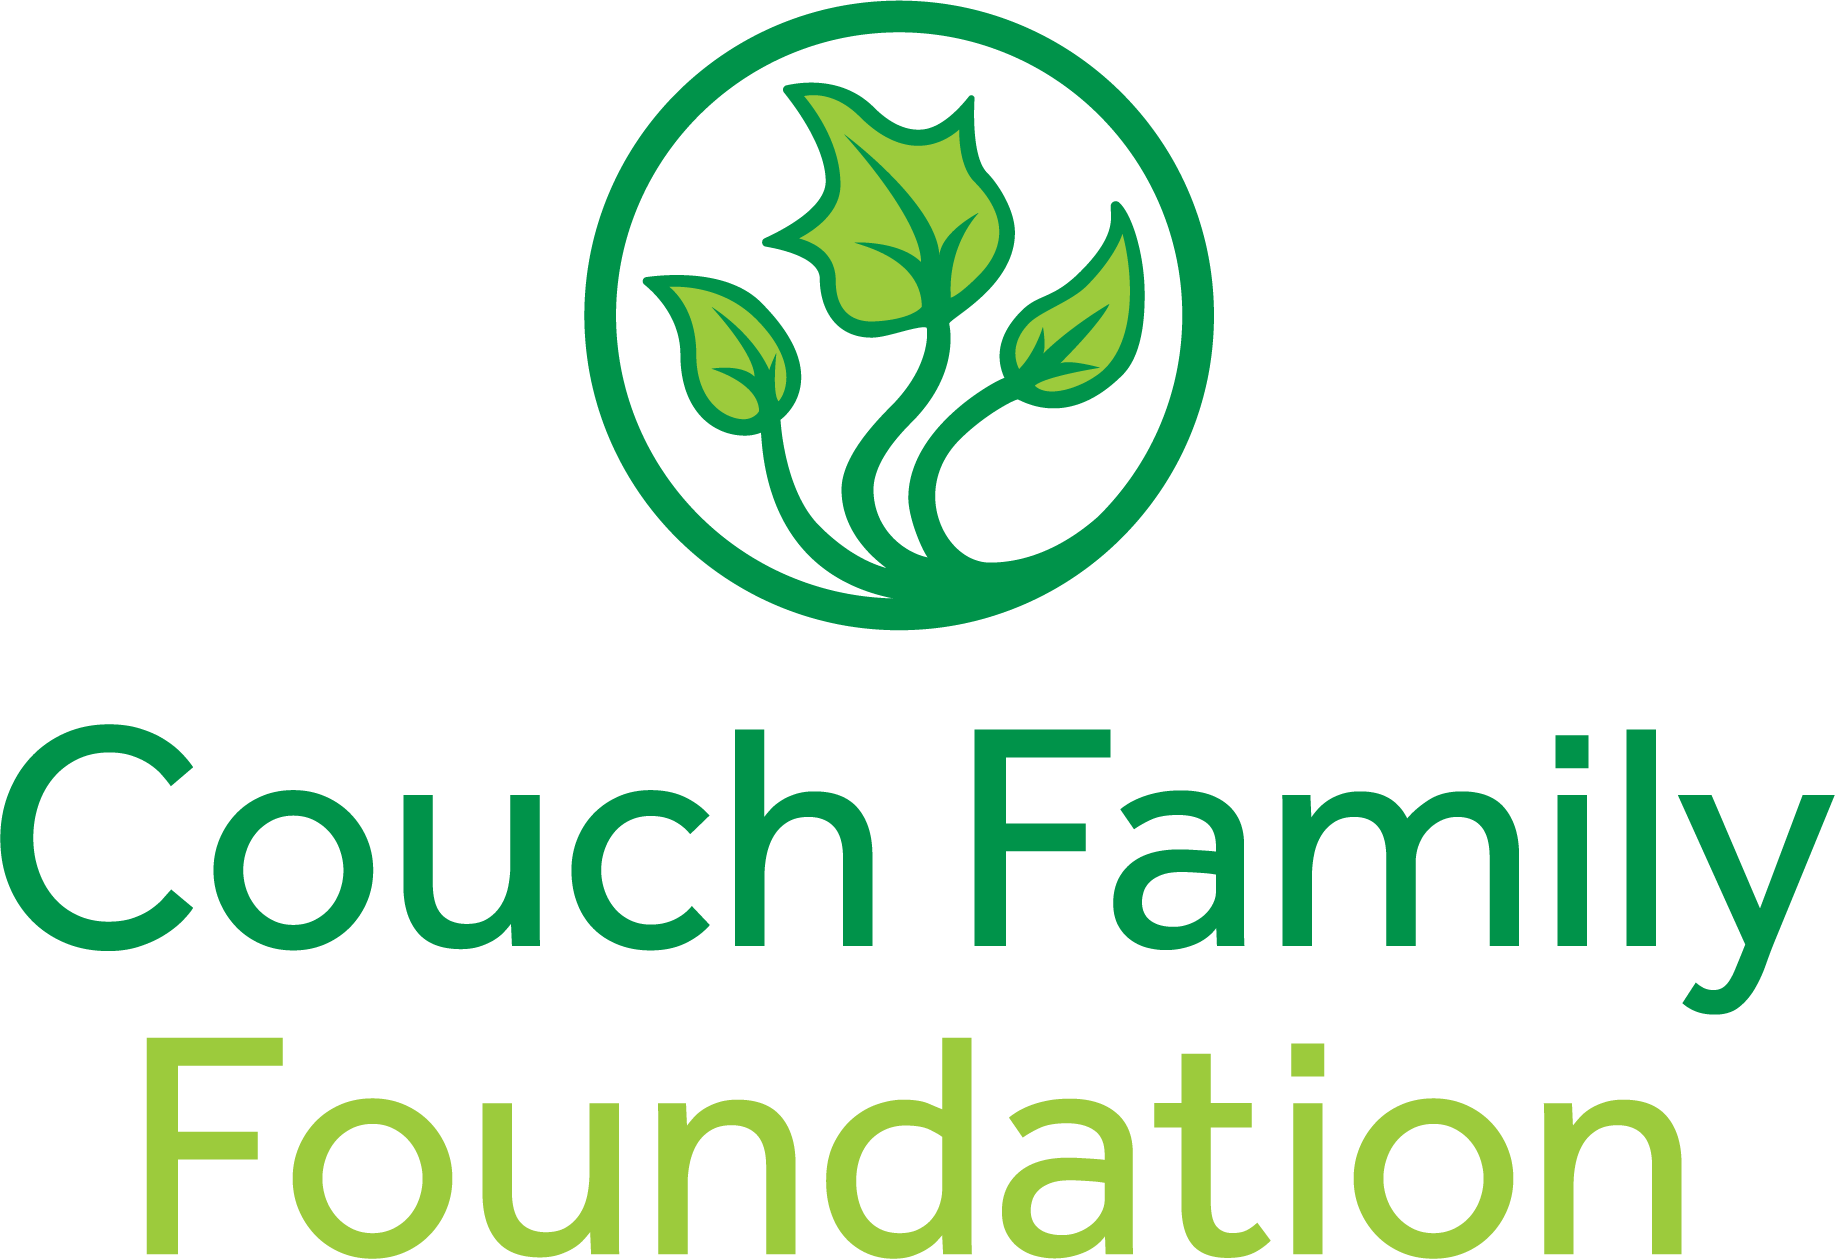 Couch Family Foundation logo